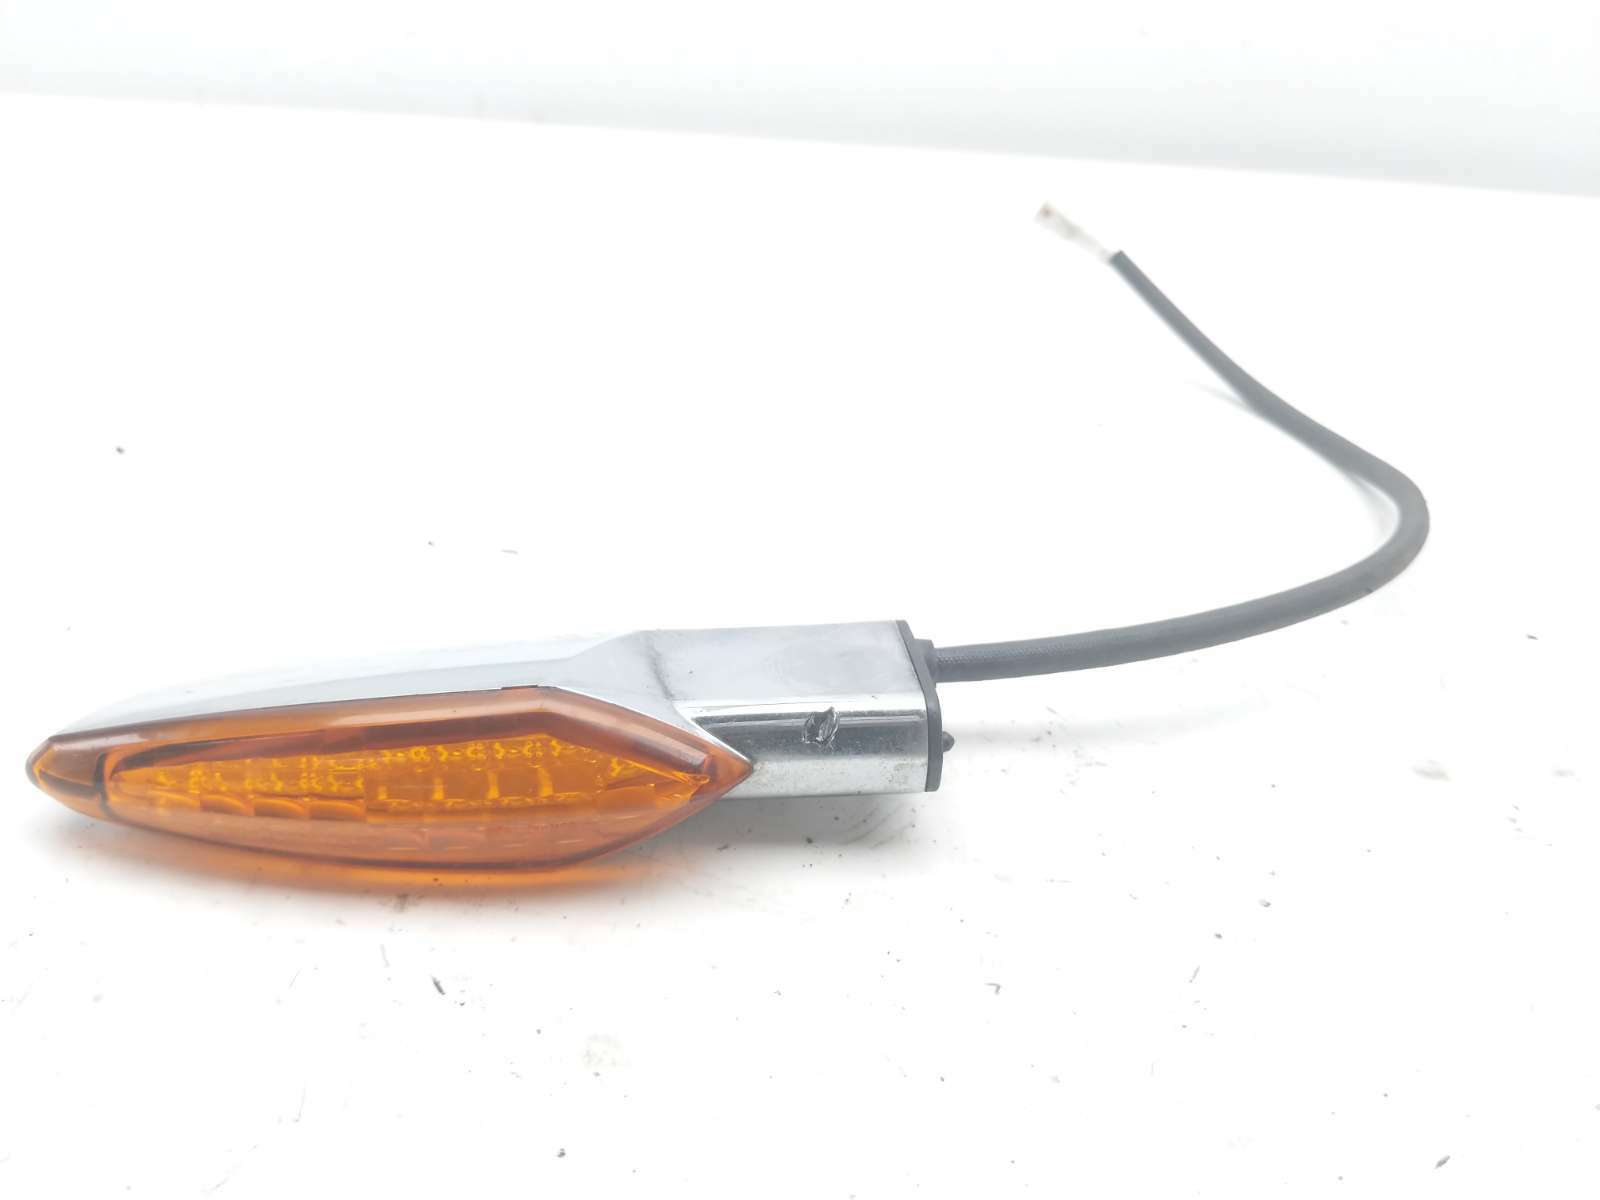 12 Victory Cross Country Tour Turn Signal Flasher Indicator Light (A)